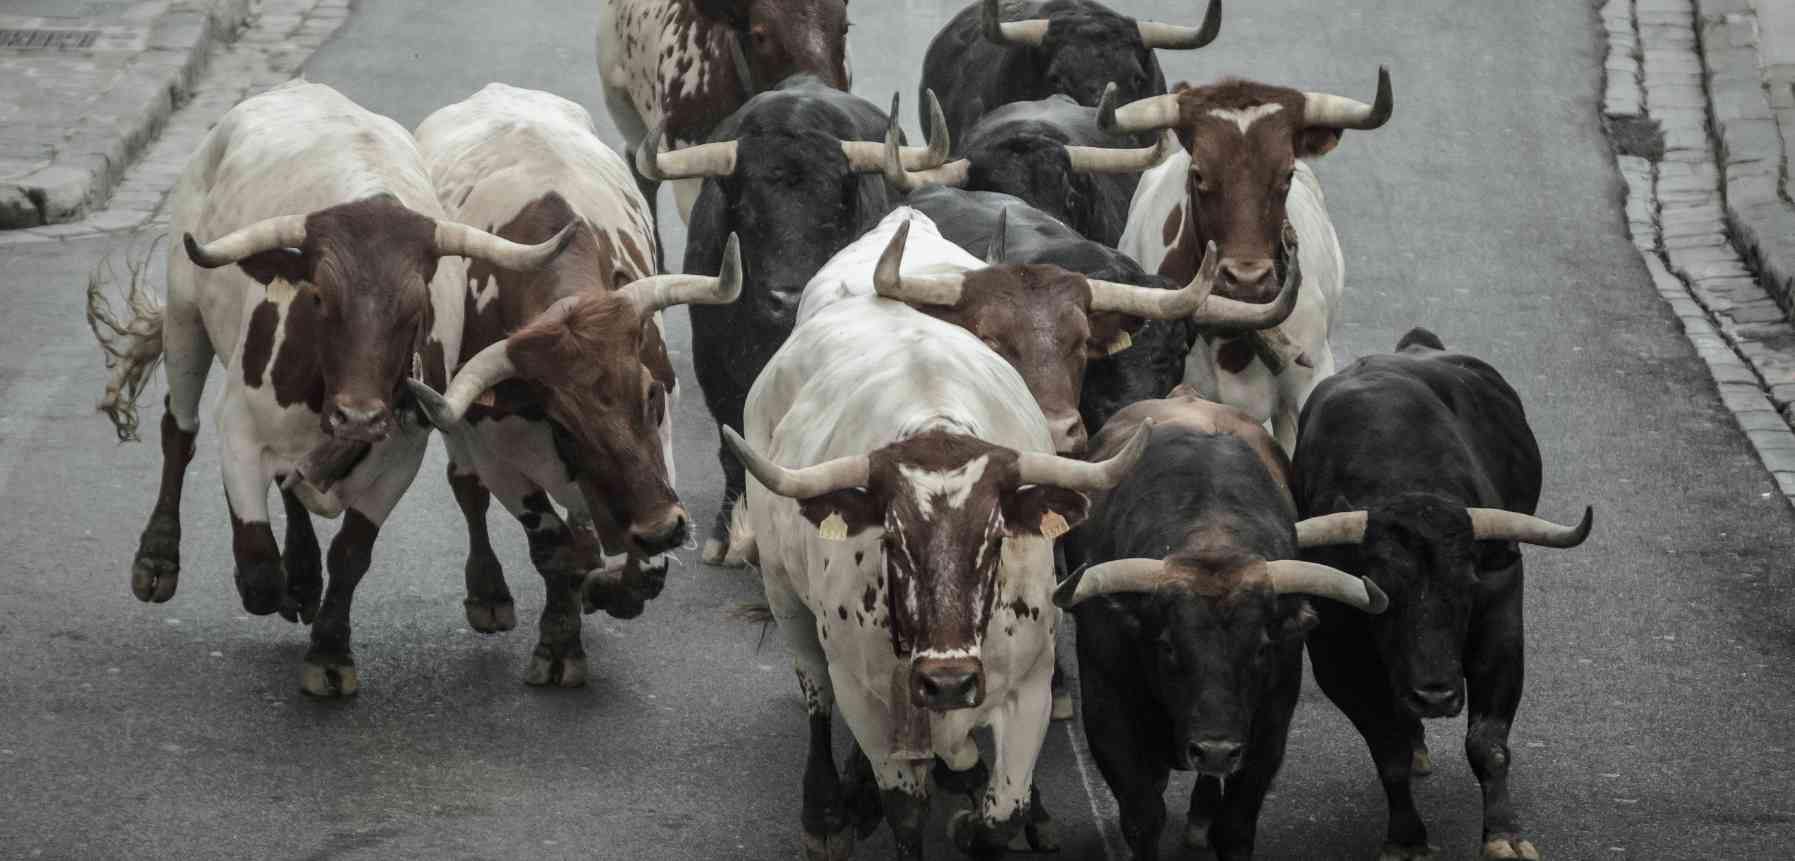 Visit Pamplona to witness the Running of the Bulls